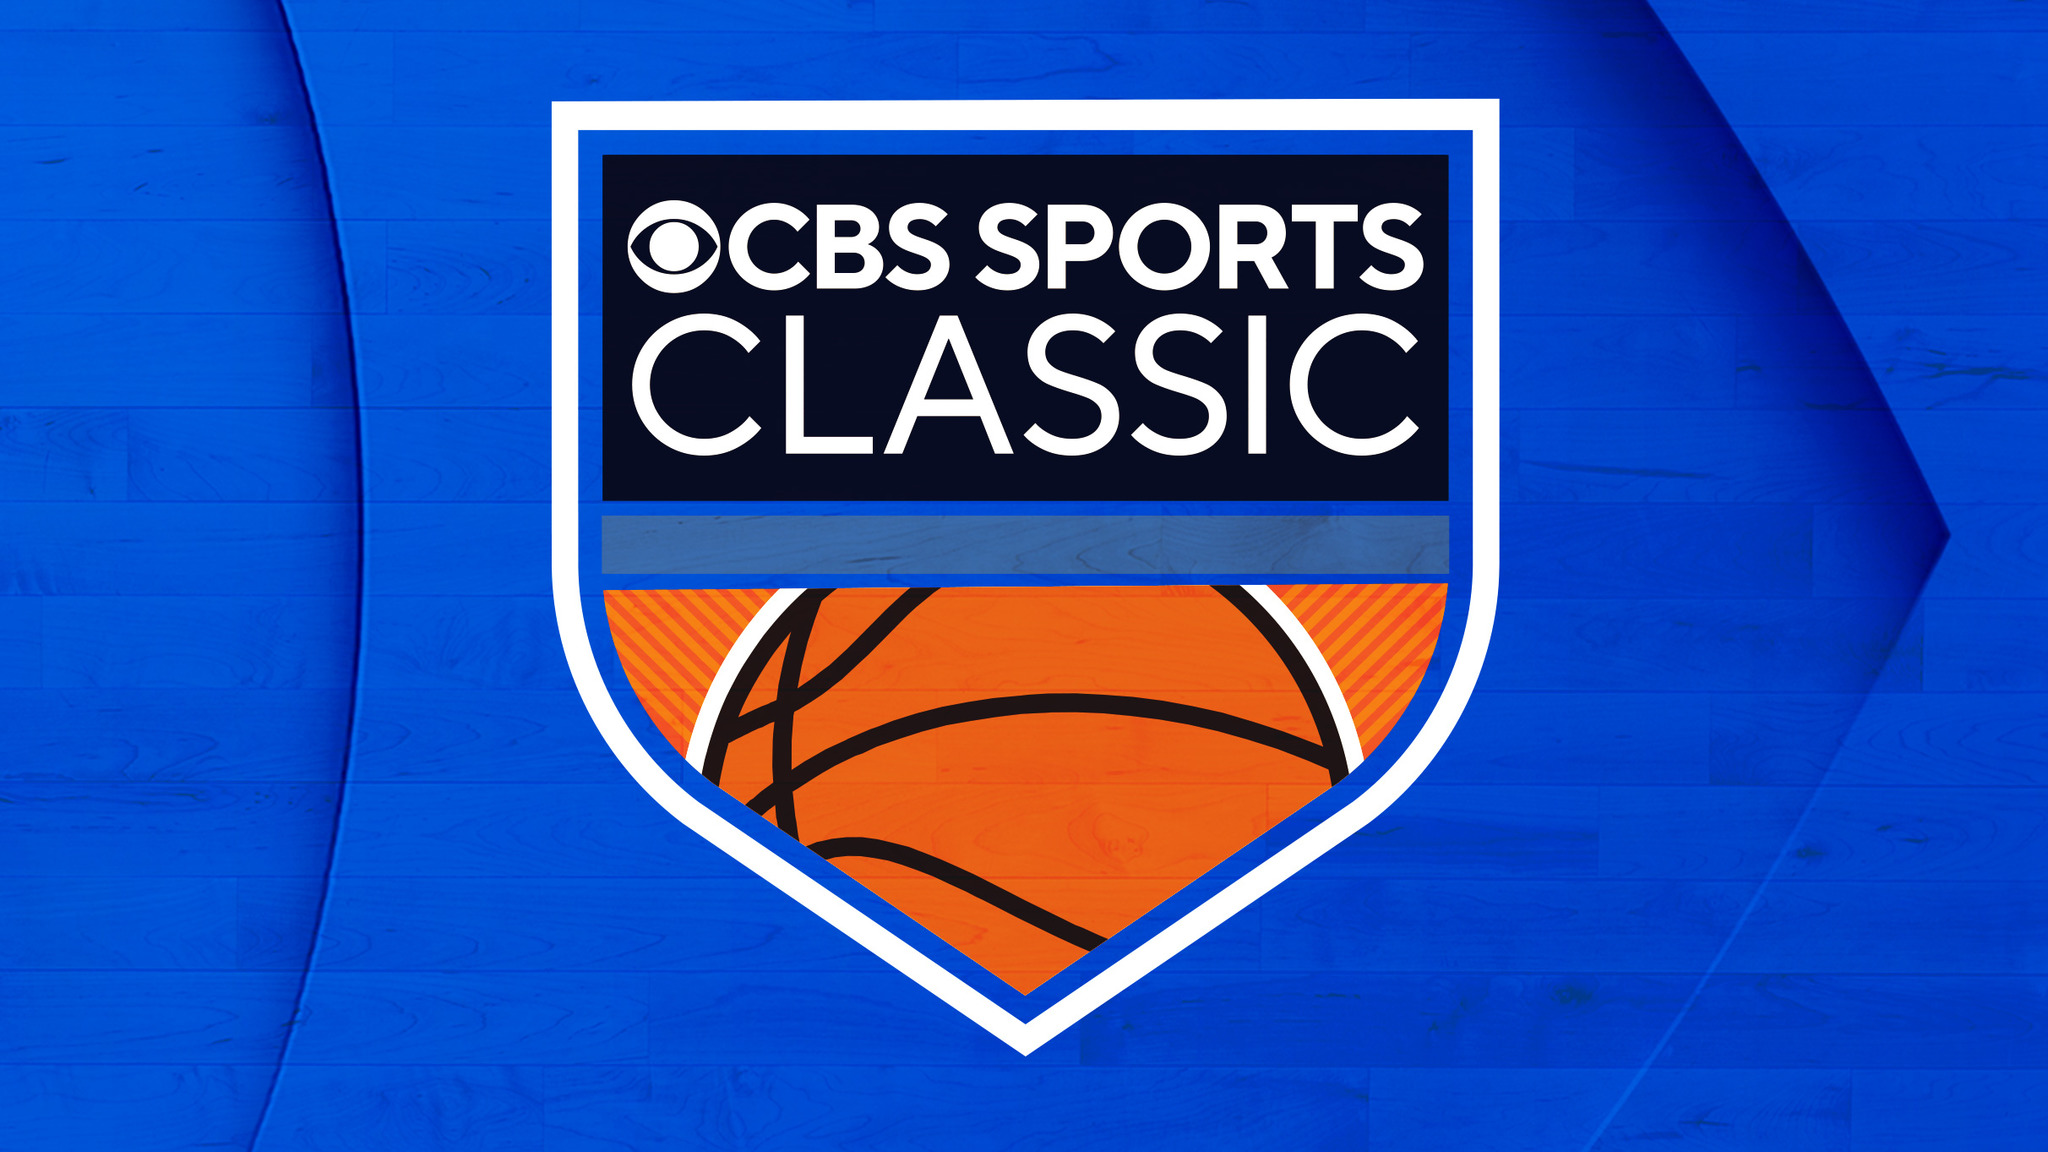 CBS Sports Classic Tickets Single Game Tickets & Schedule